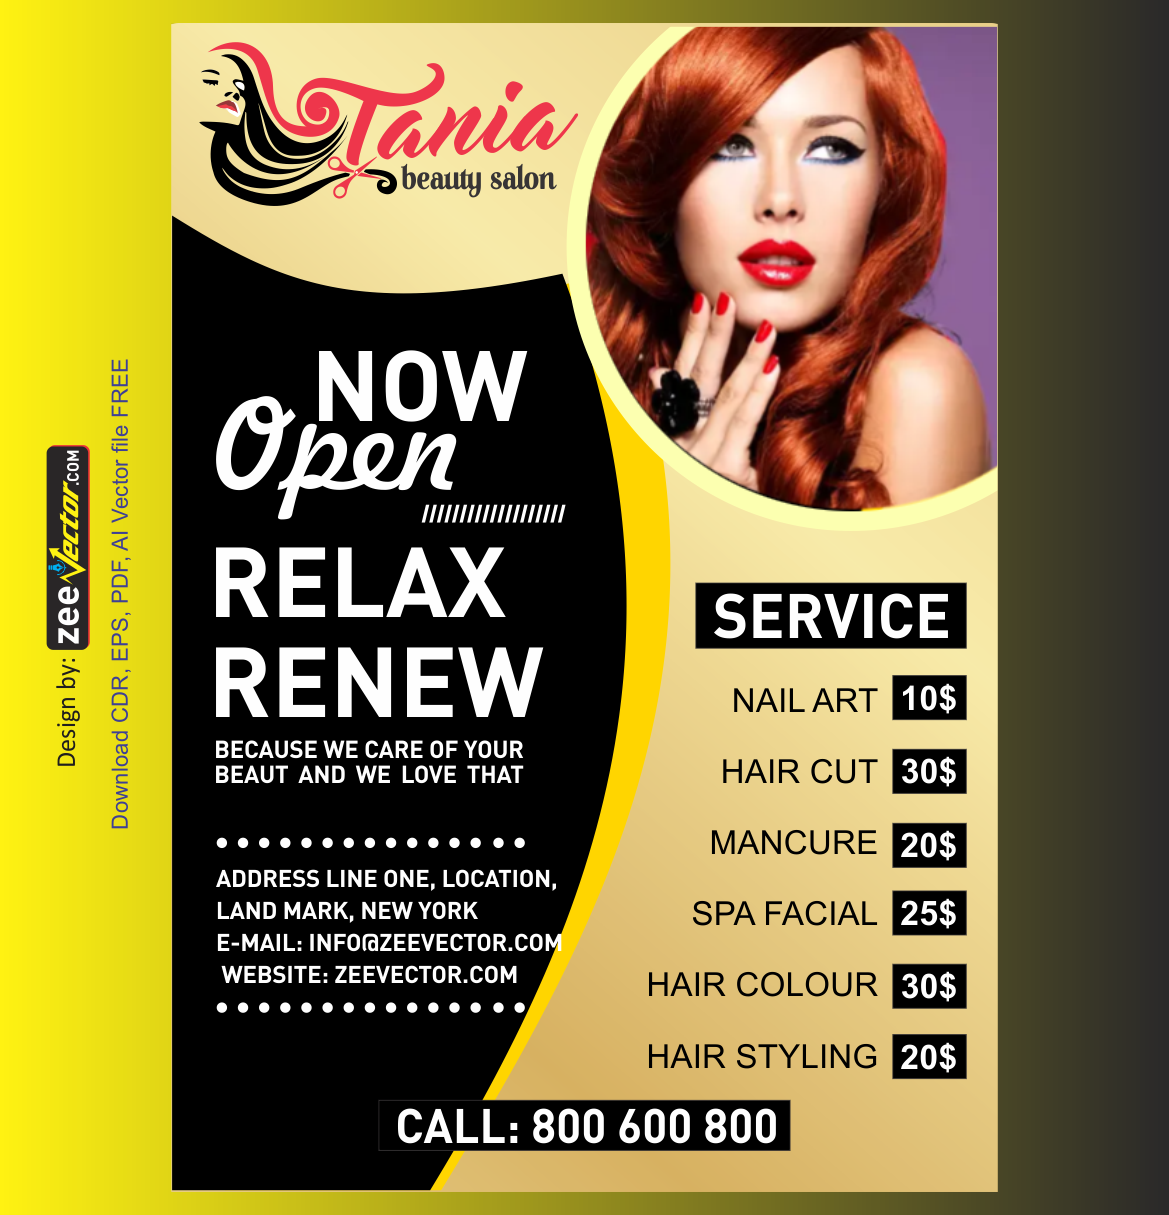 Hair Salon Flyer Templates Free - FREE Vector Design - Cdr, Ai, EPS, PNG,  SVG